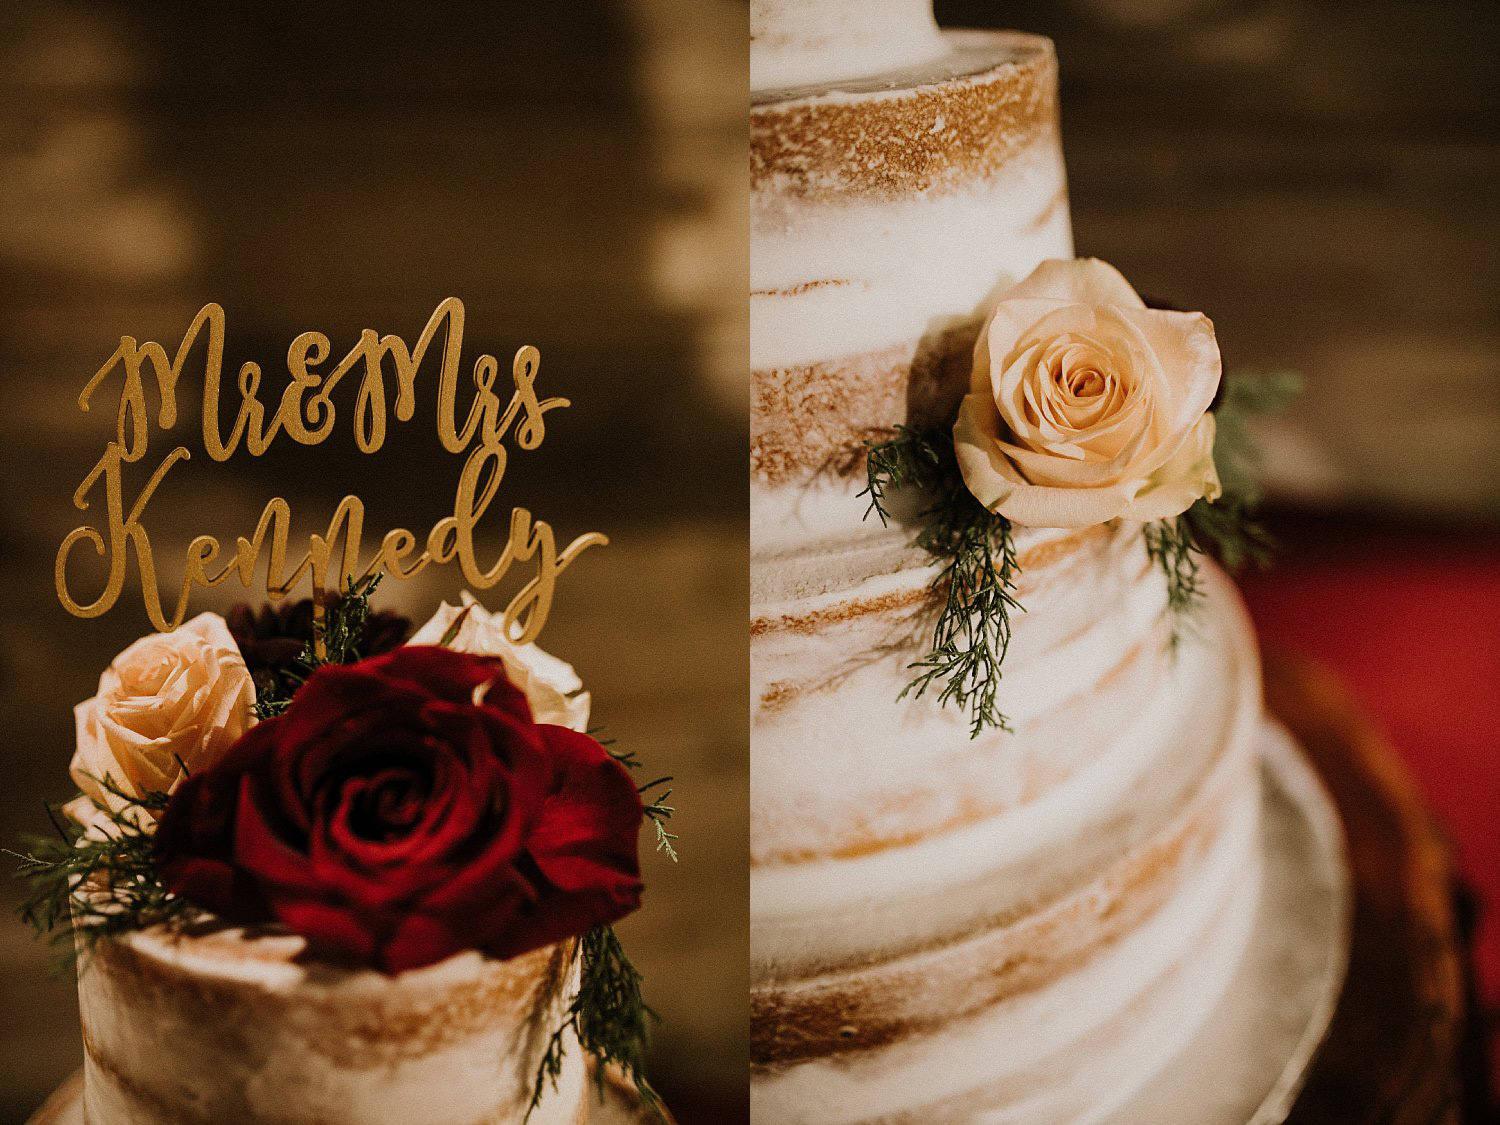 Hollow Hill Farm Event Center Wedding naked cake with laser cut cake topper in old town